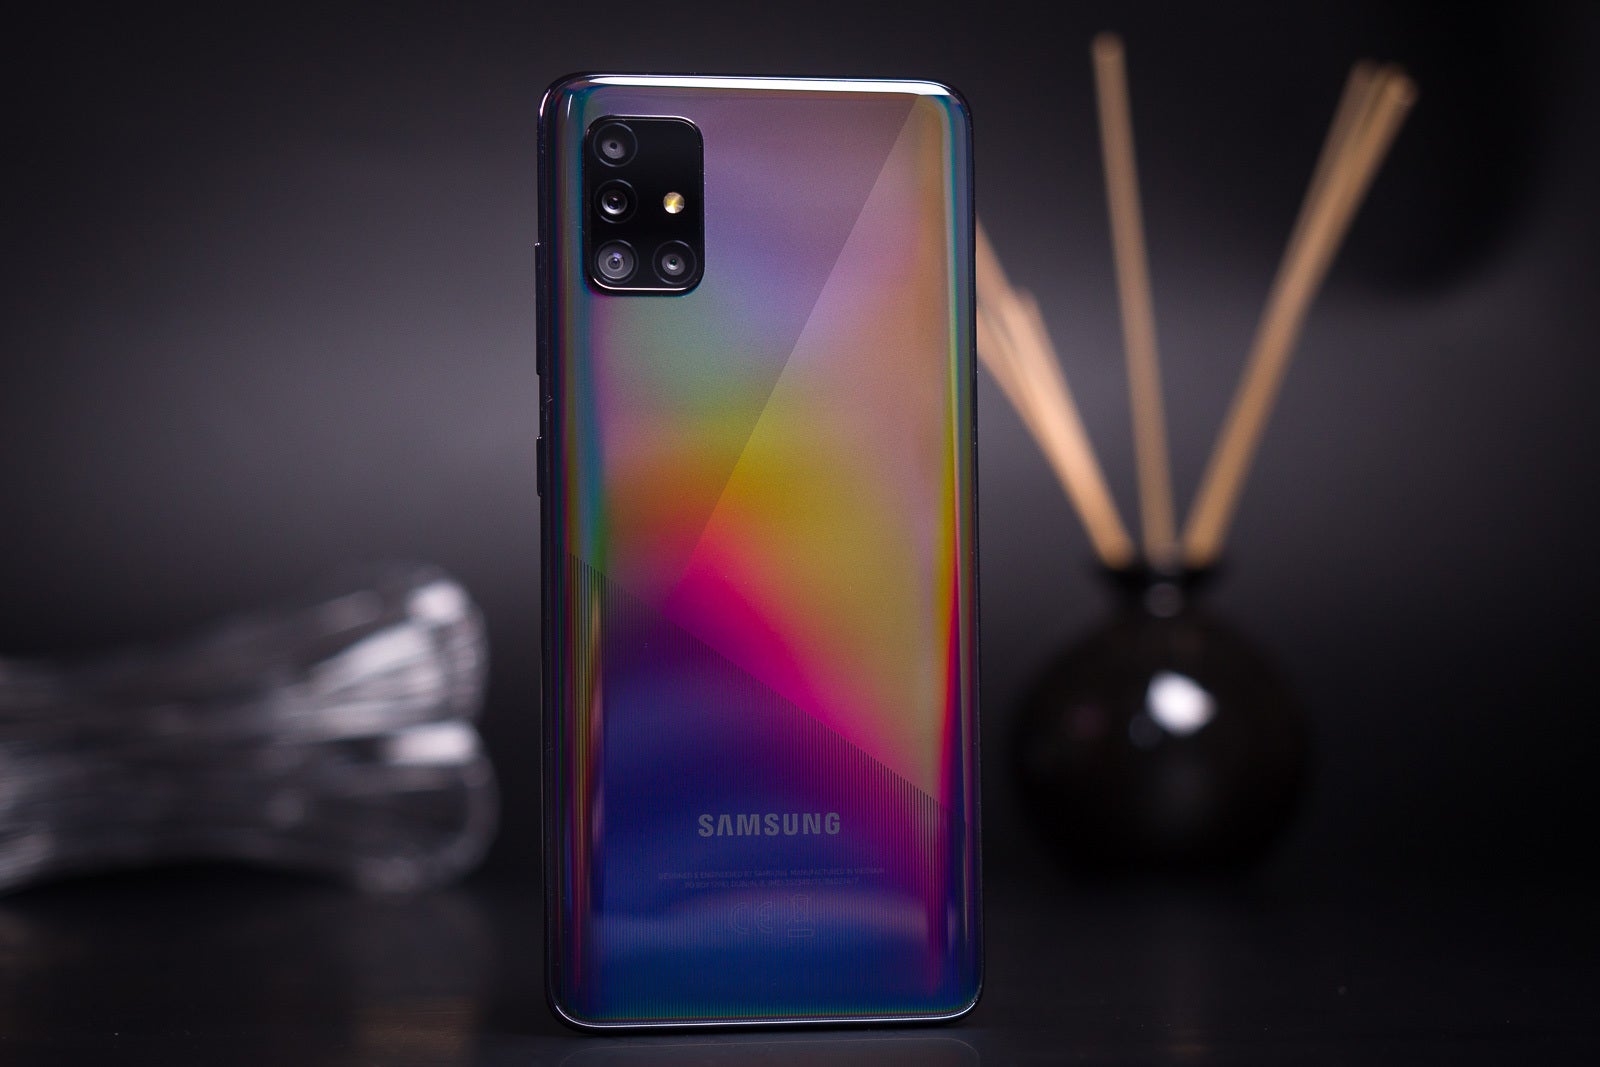 Cheaper Galaxy devices sustained Samsung sales - Apple's iPhone accounted for almost half of US smartphone shipments in Q2